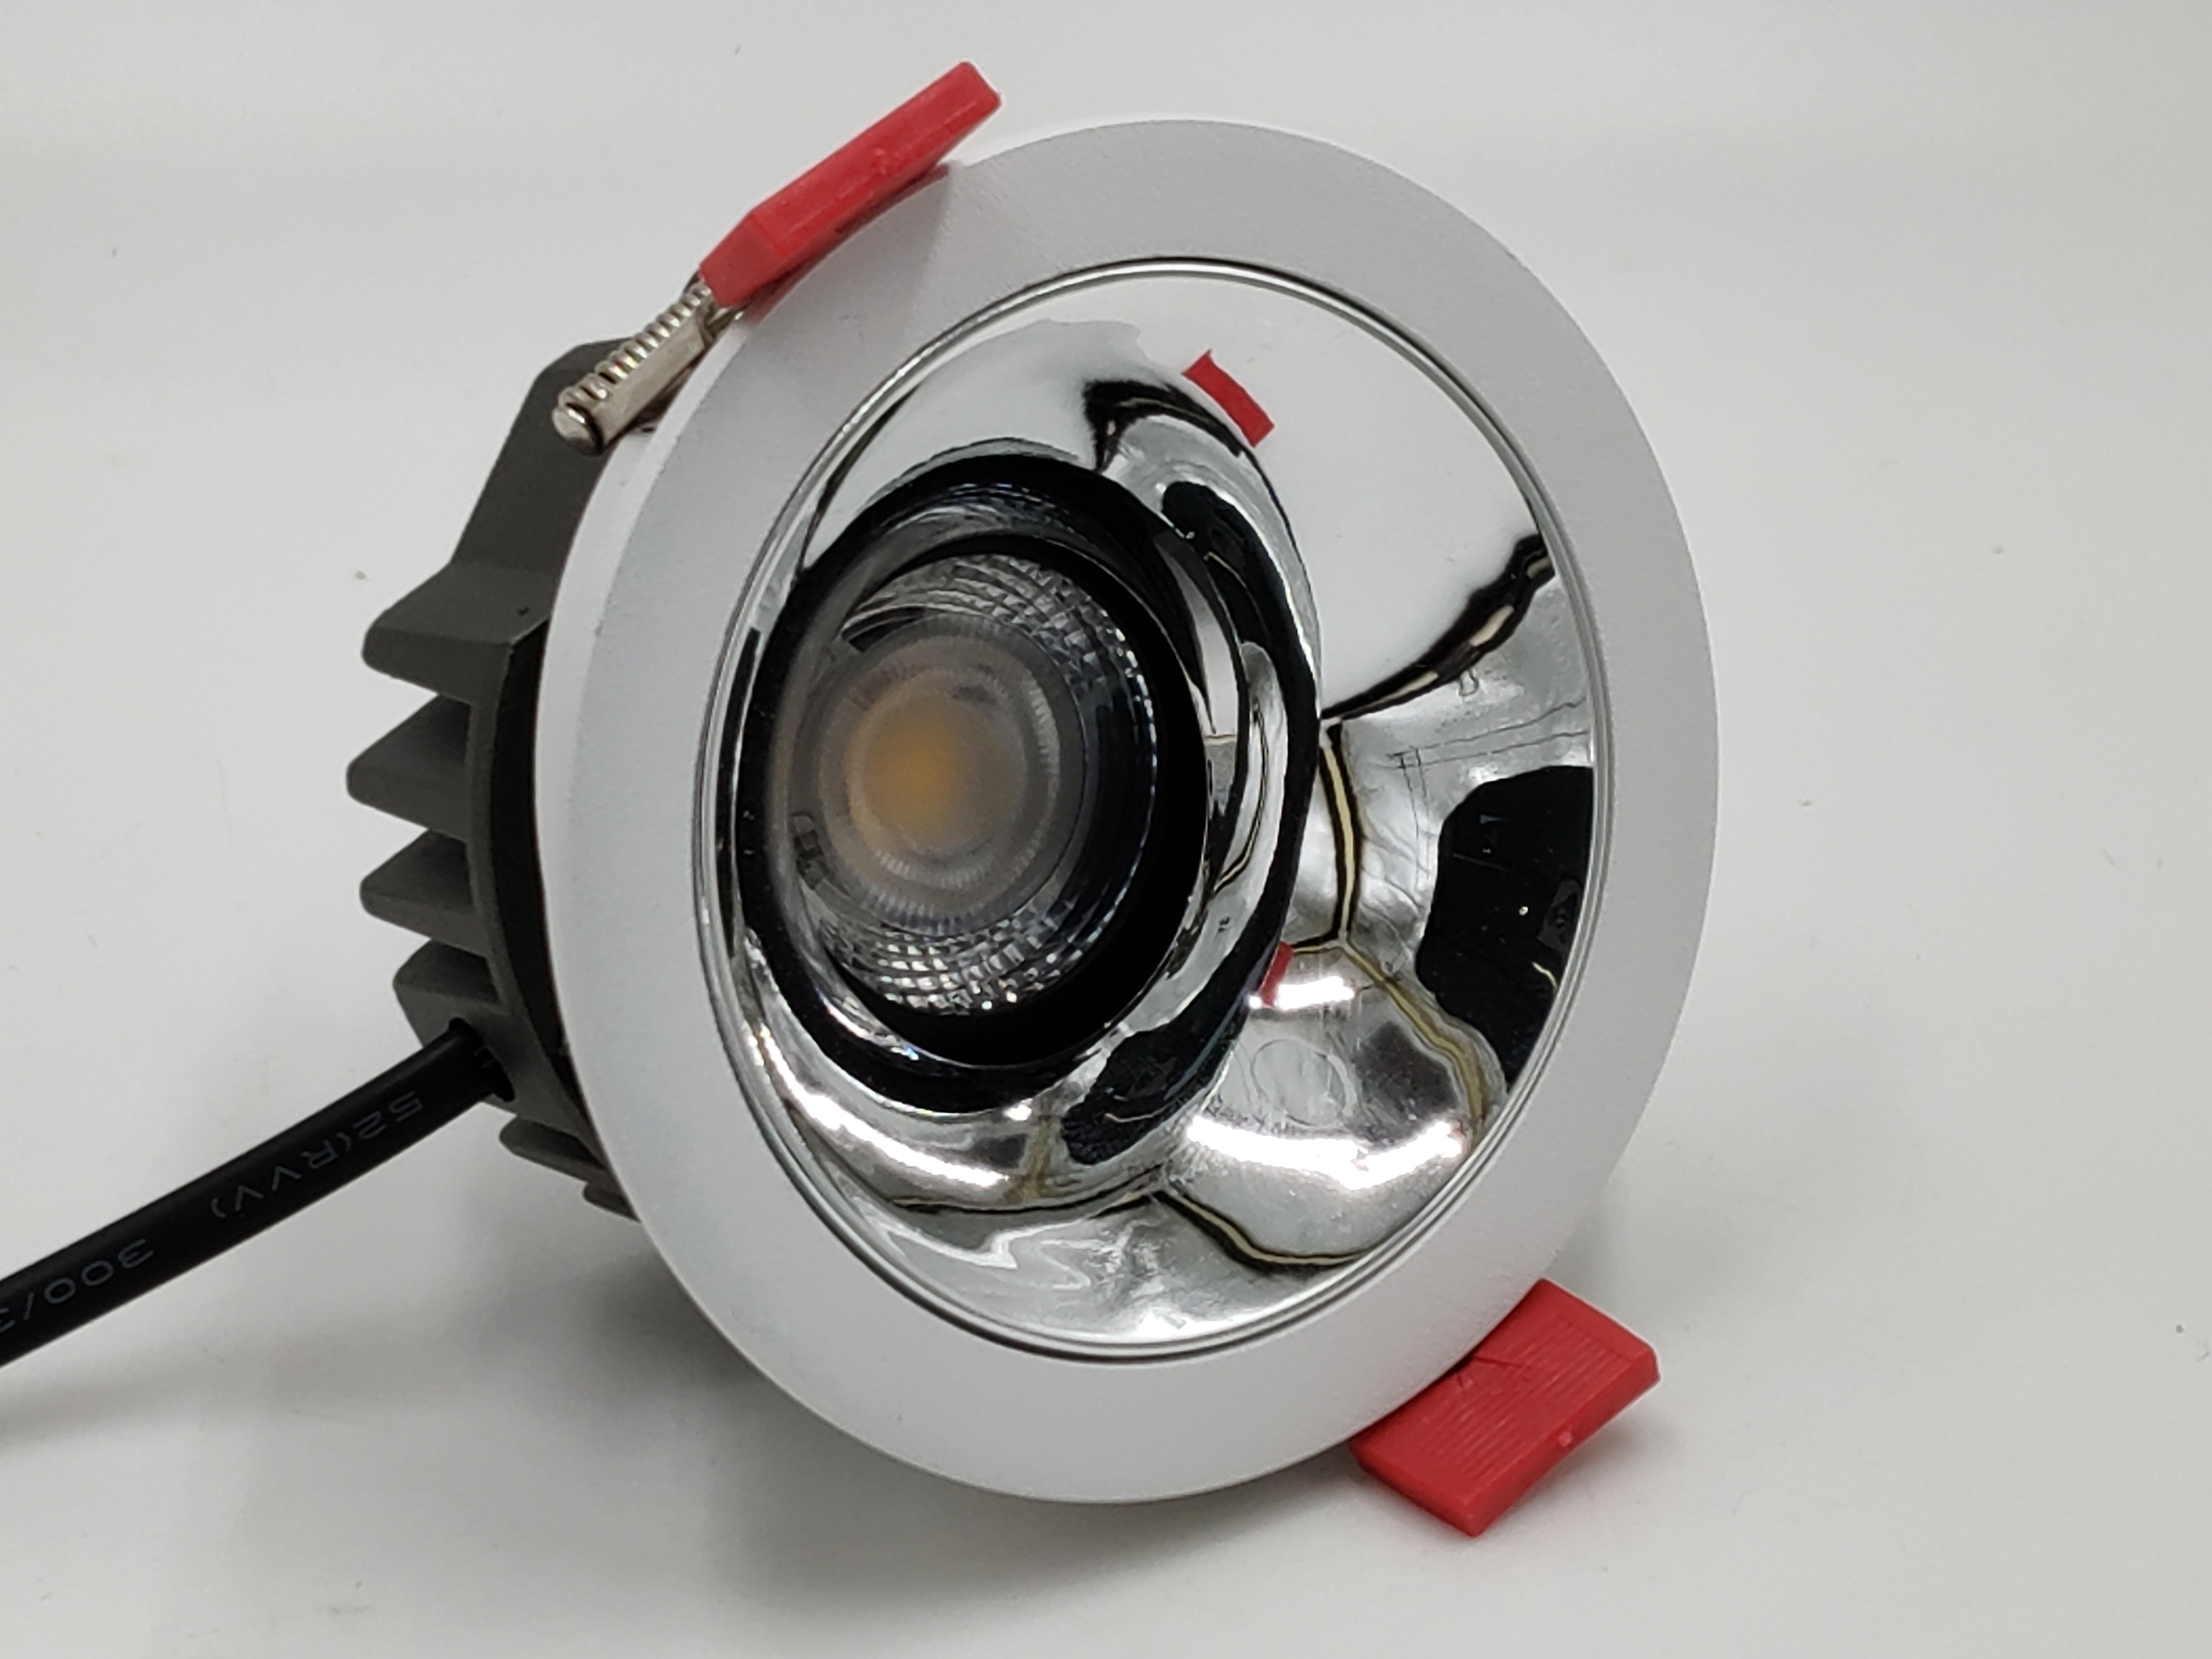 Embedded COB spotlight, suitable for low ceiling. 50MM height.